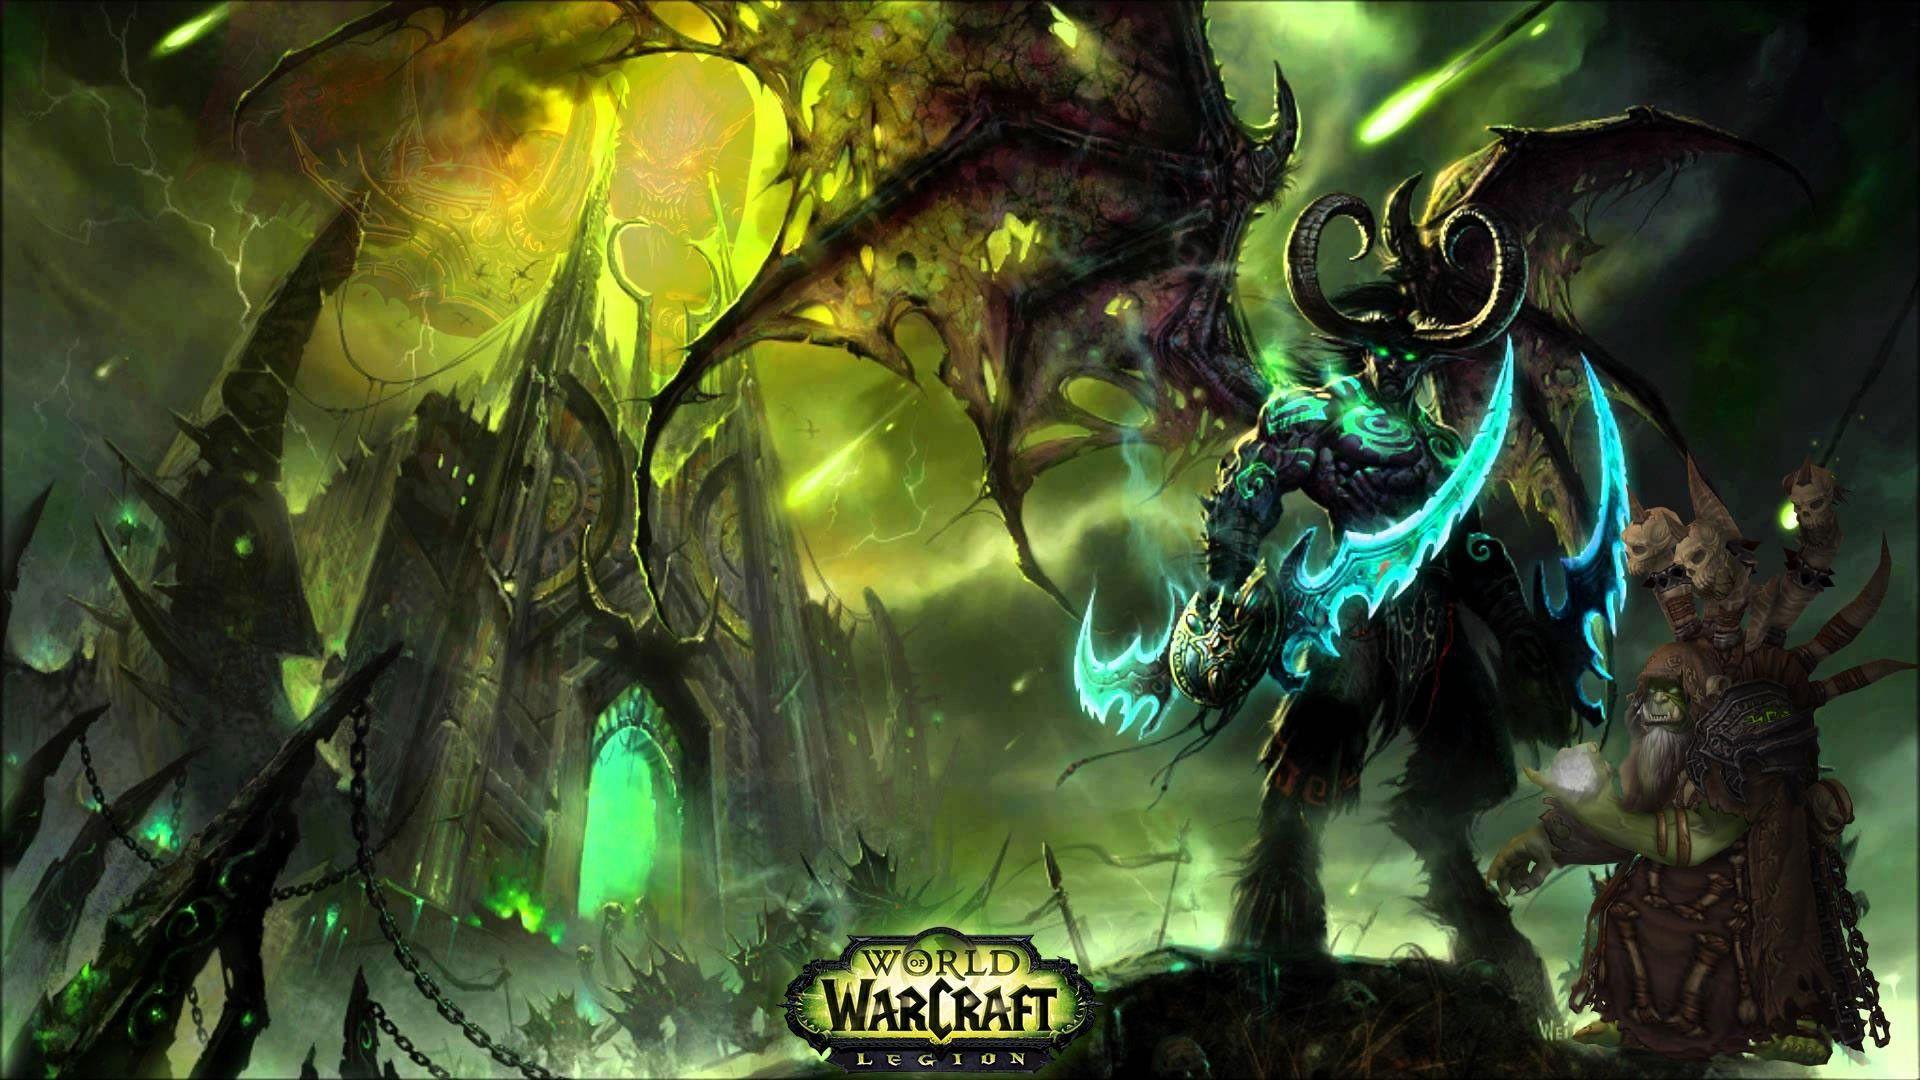 World of Warcraft wallpaper HDDownload free awesome wallpaper